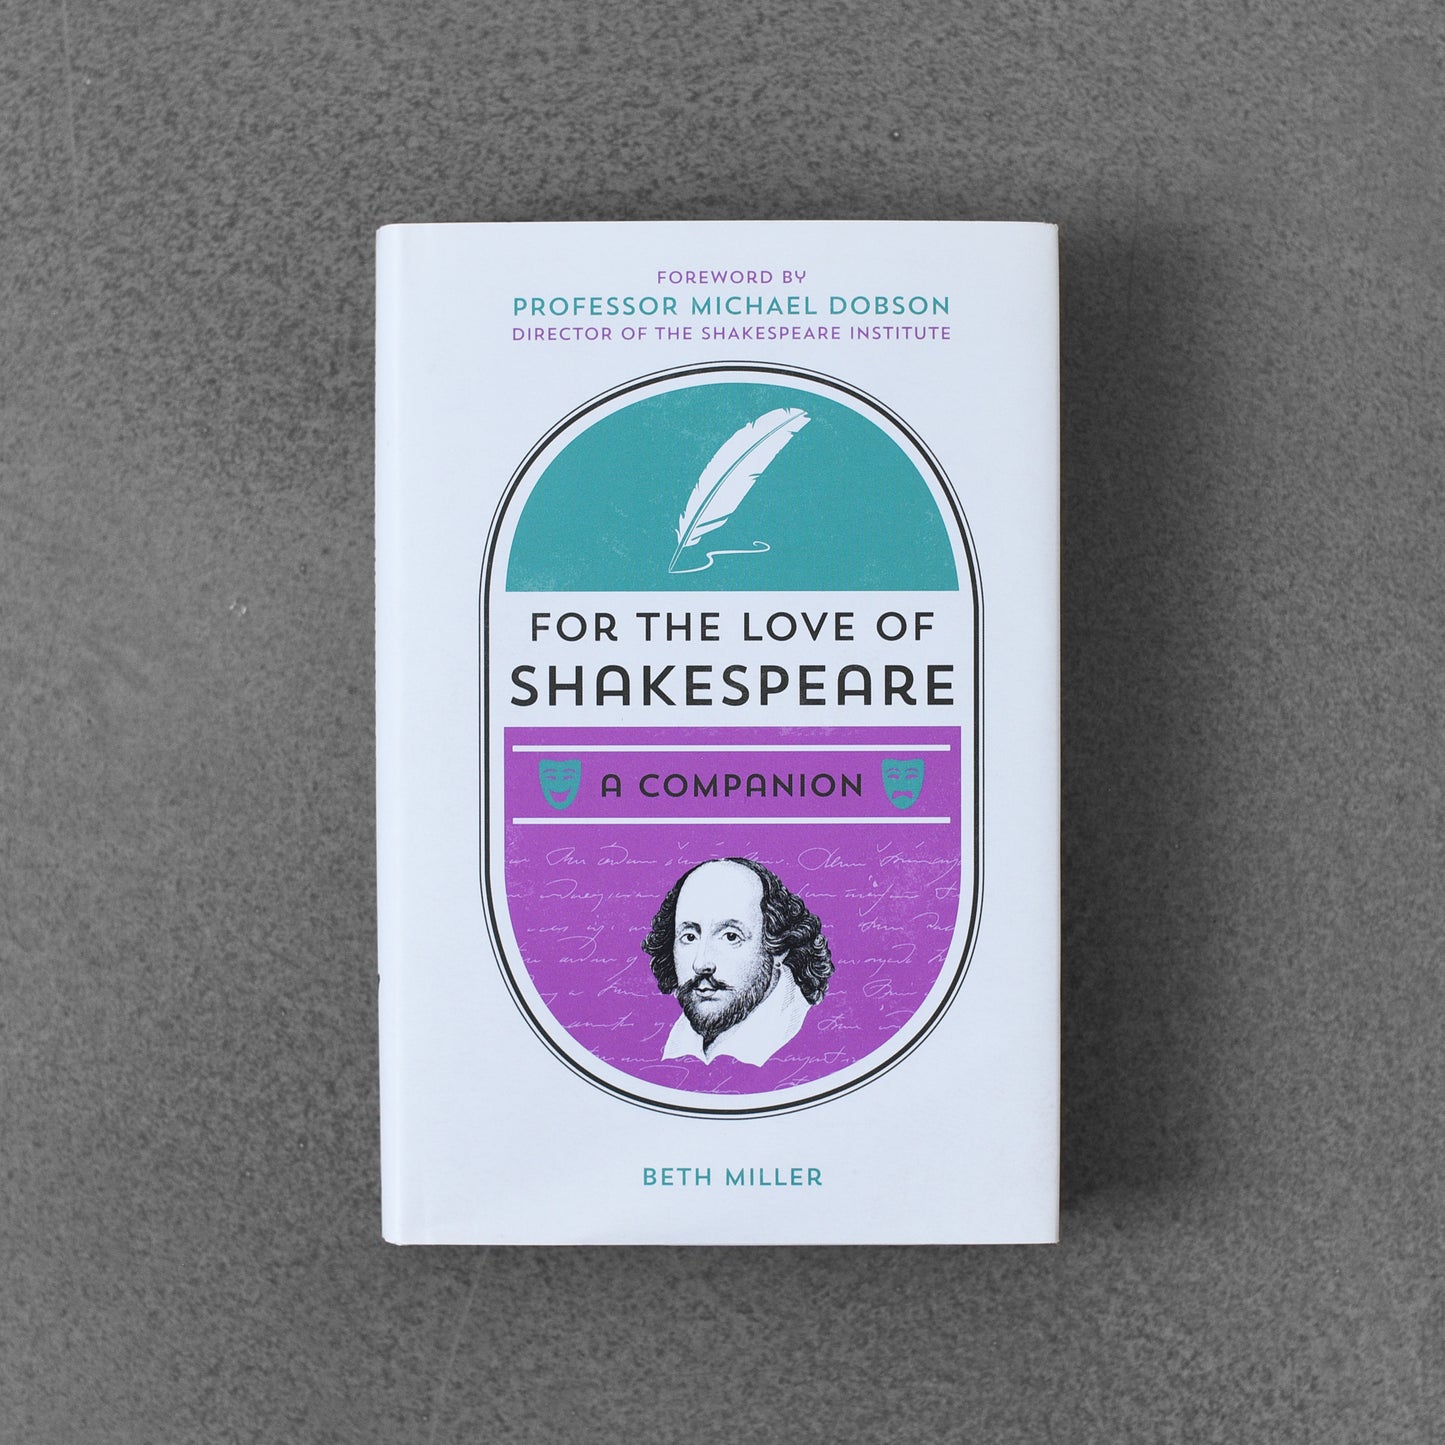 For the Love of Shakespeare, a companion